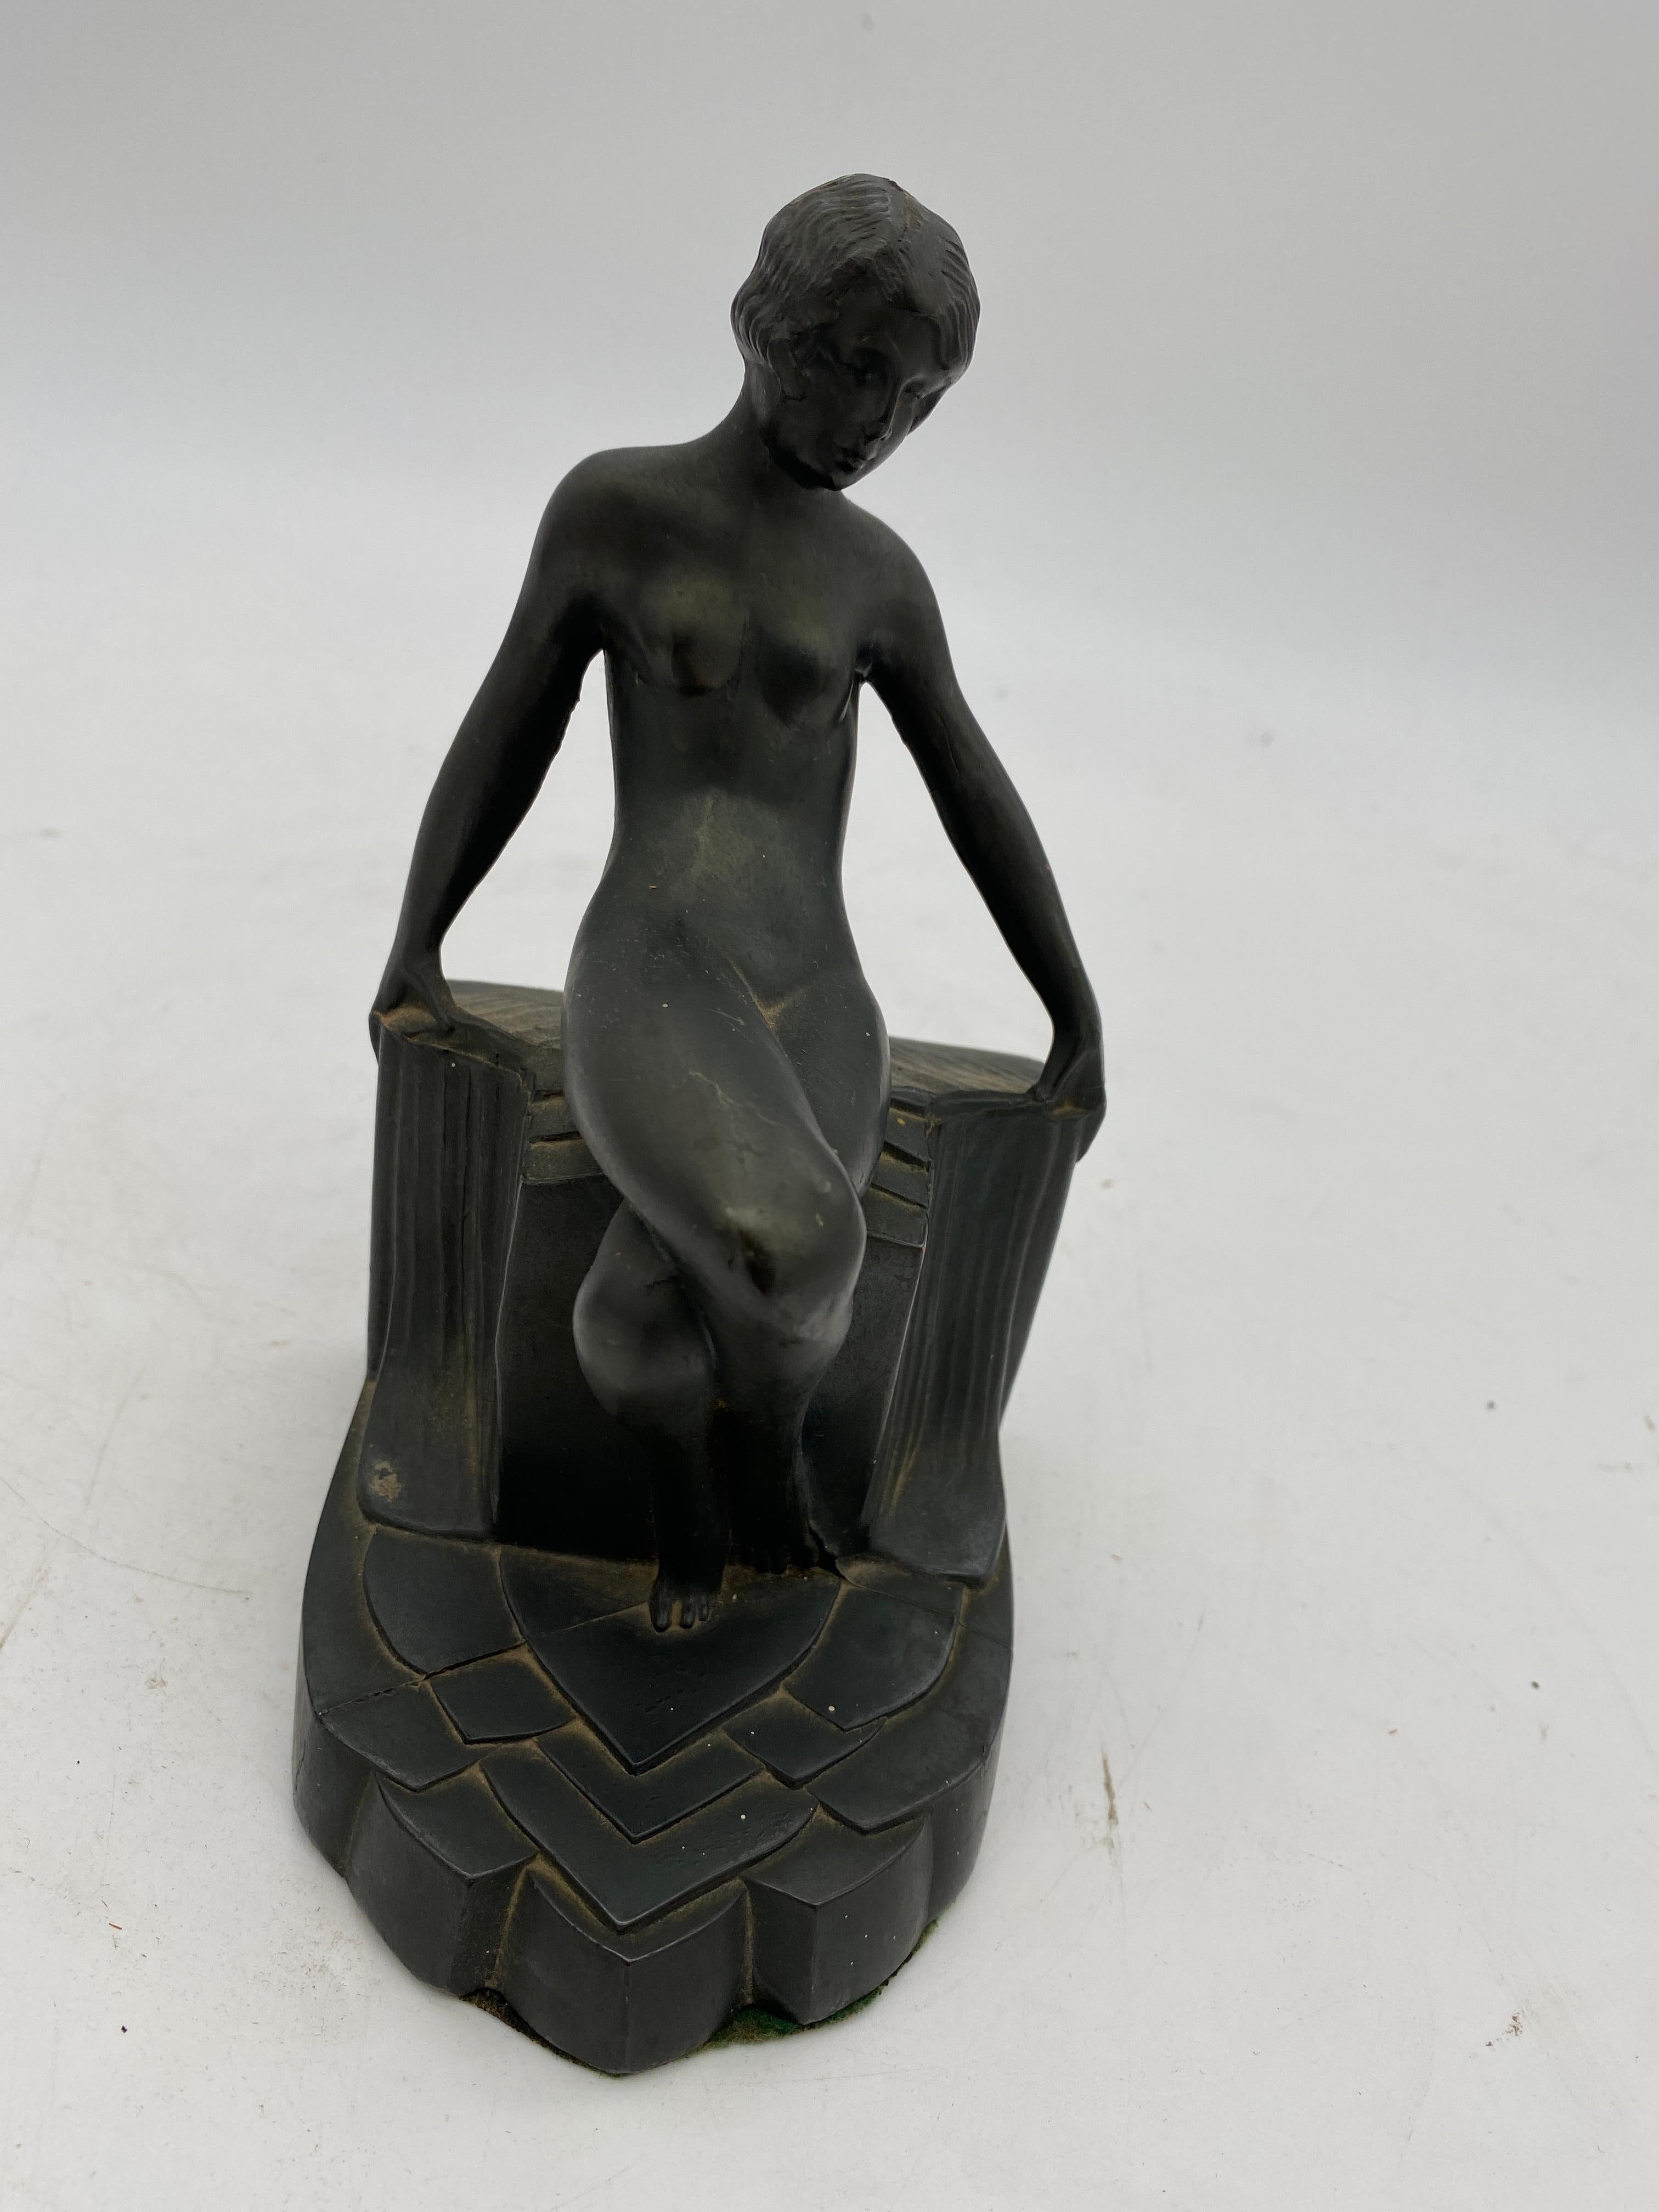 Nude Art Deco Flapper Girl Spelter Metal Bookends by Nuart, Pair In Excellent Condition For Sale In Van Nuys, CA